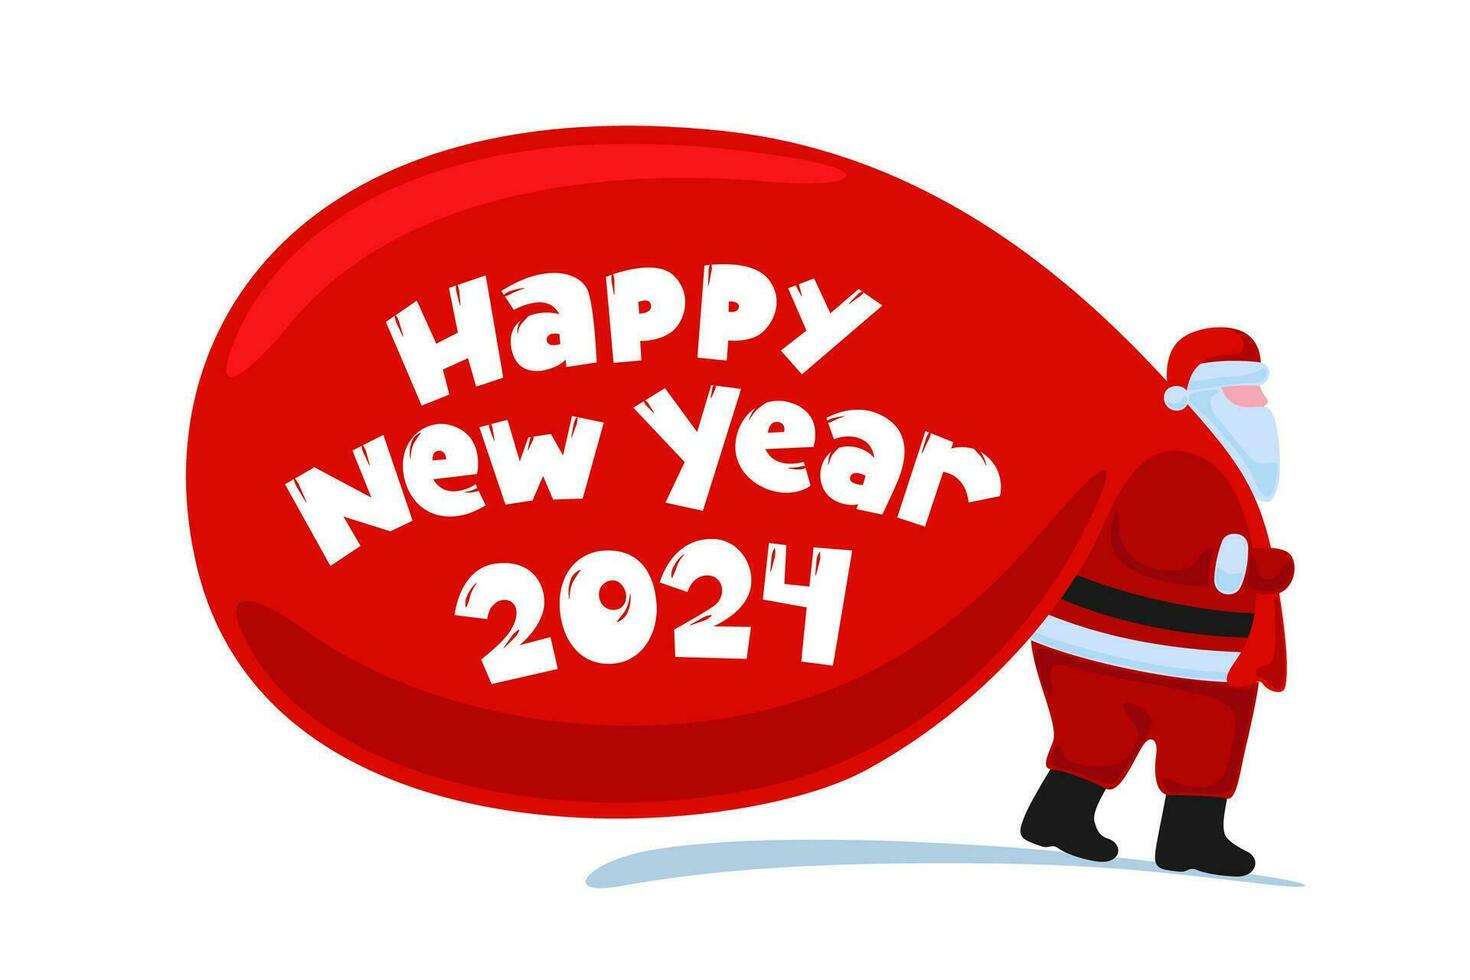 Santa Claus cartoon character coming and carries large huge heavy gifts red bag. Christmas and Happy New year 2024 holiday greeting card. Vector eps flat celebration poster illustration